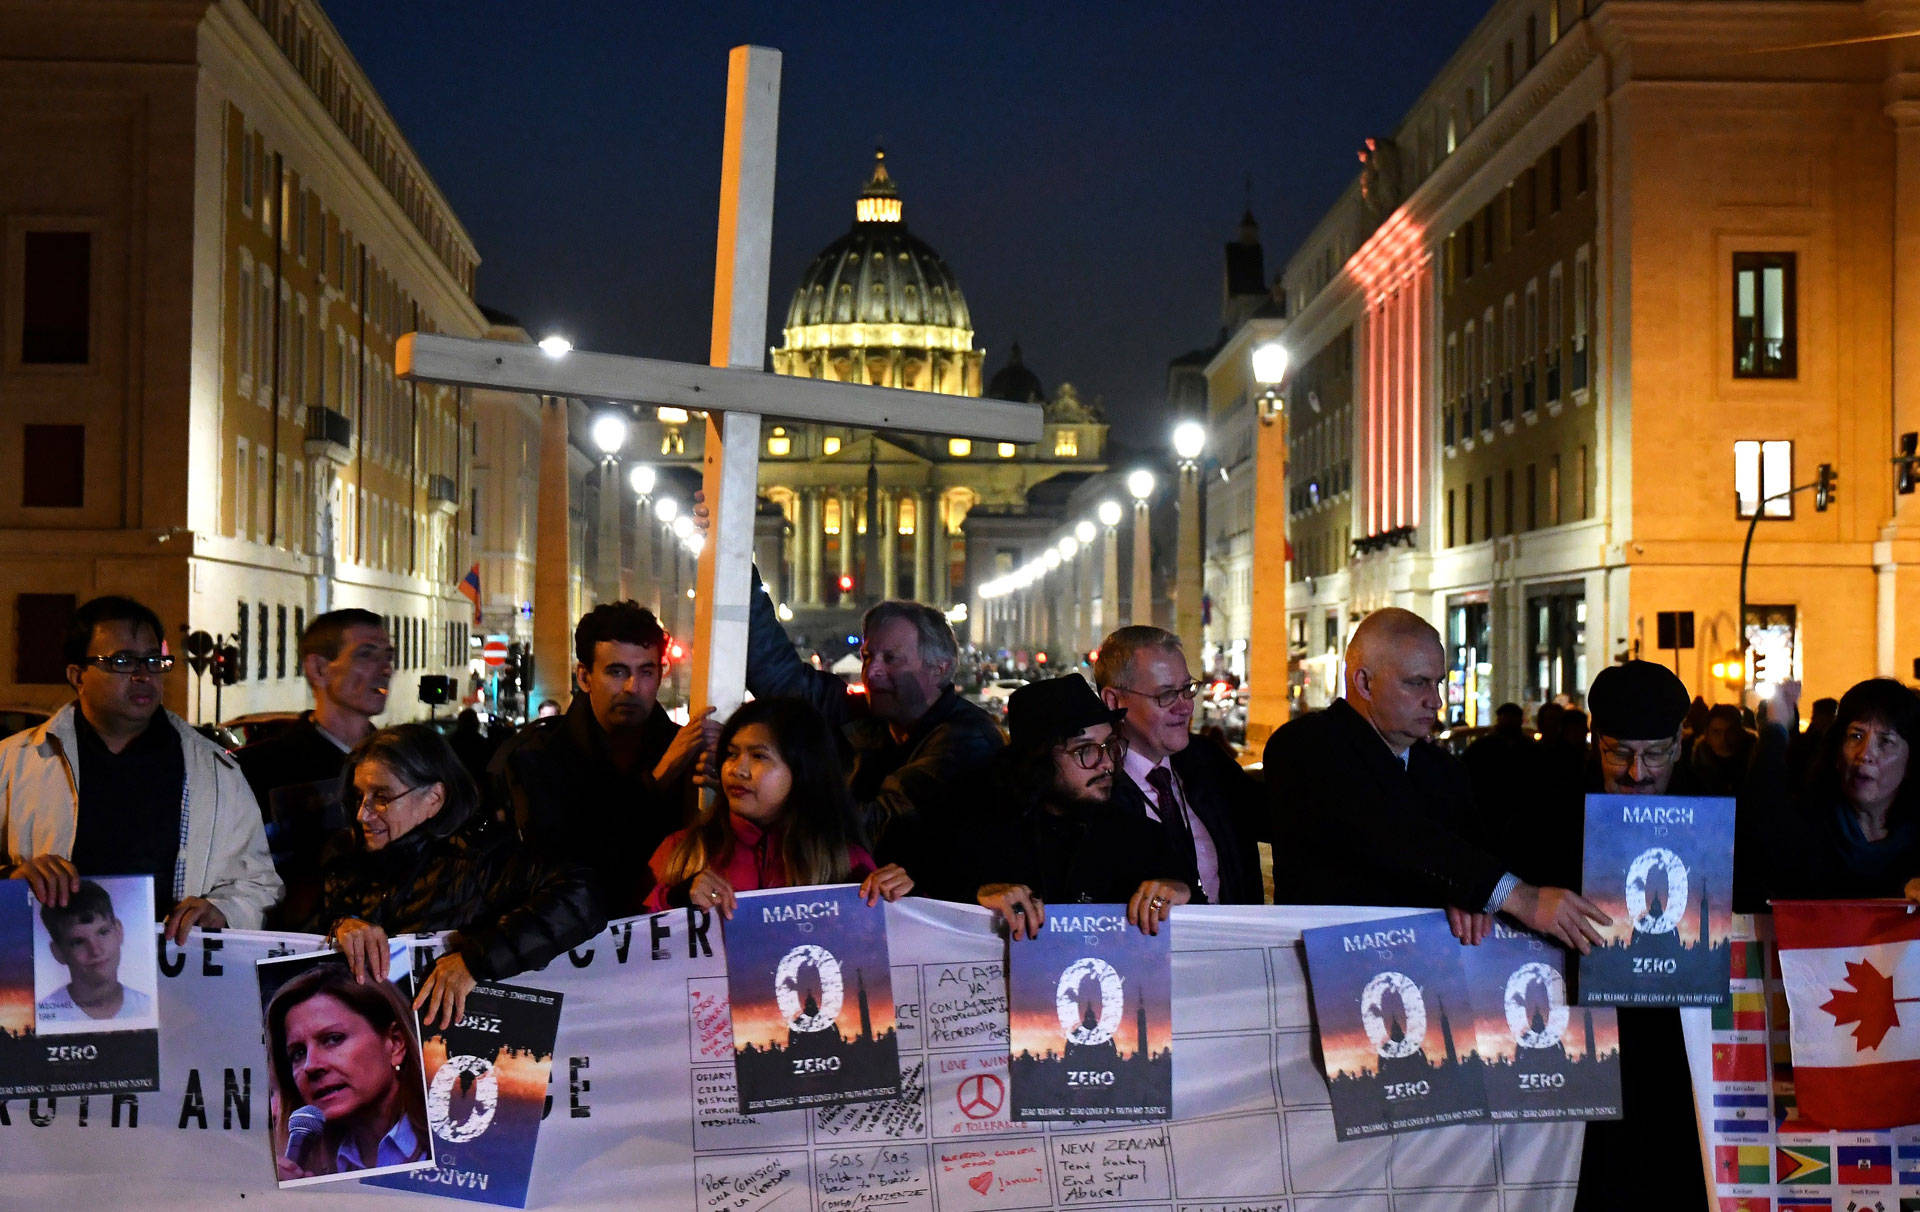 Members of Ending Clergy Abuse (ECA), a global organization of survivors and activists who are in Rome for this week's papal summit on the sex abuse crisis within the Catholic Church, hold a protest gathering on Feb. 21, 2019, in Rome. Their placards read 'Zero Tolerance + Zero Cover Up = Truth and Justice.' ALBERTO PIZZOLI/AFP/Getty Images